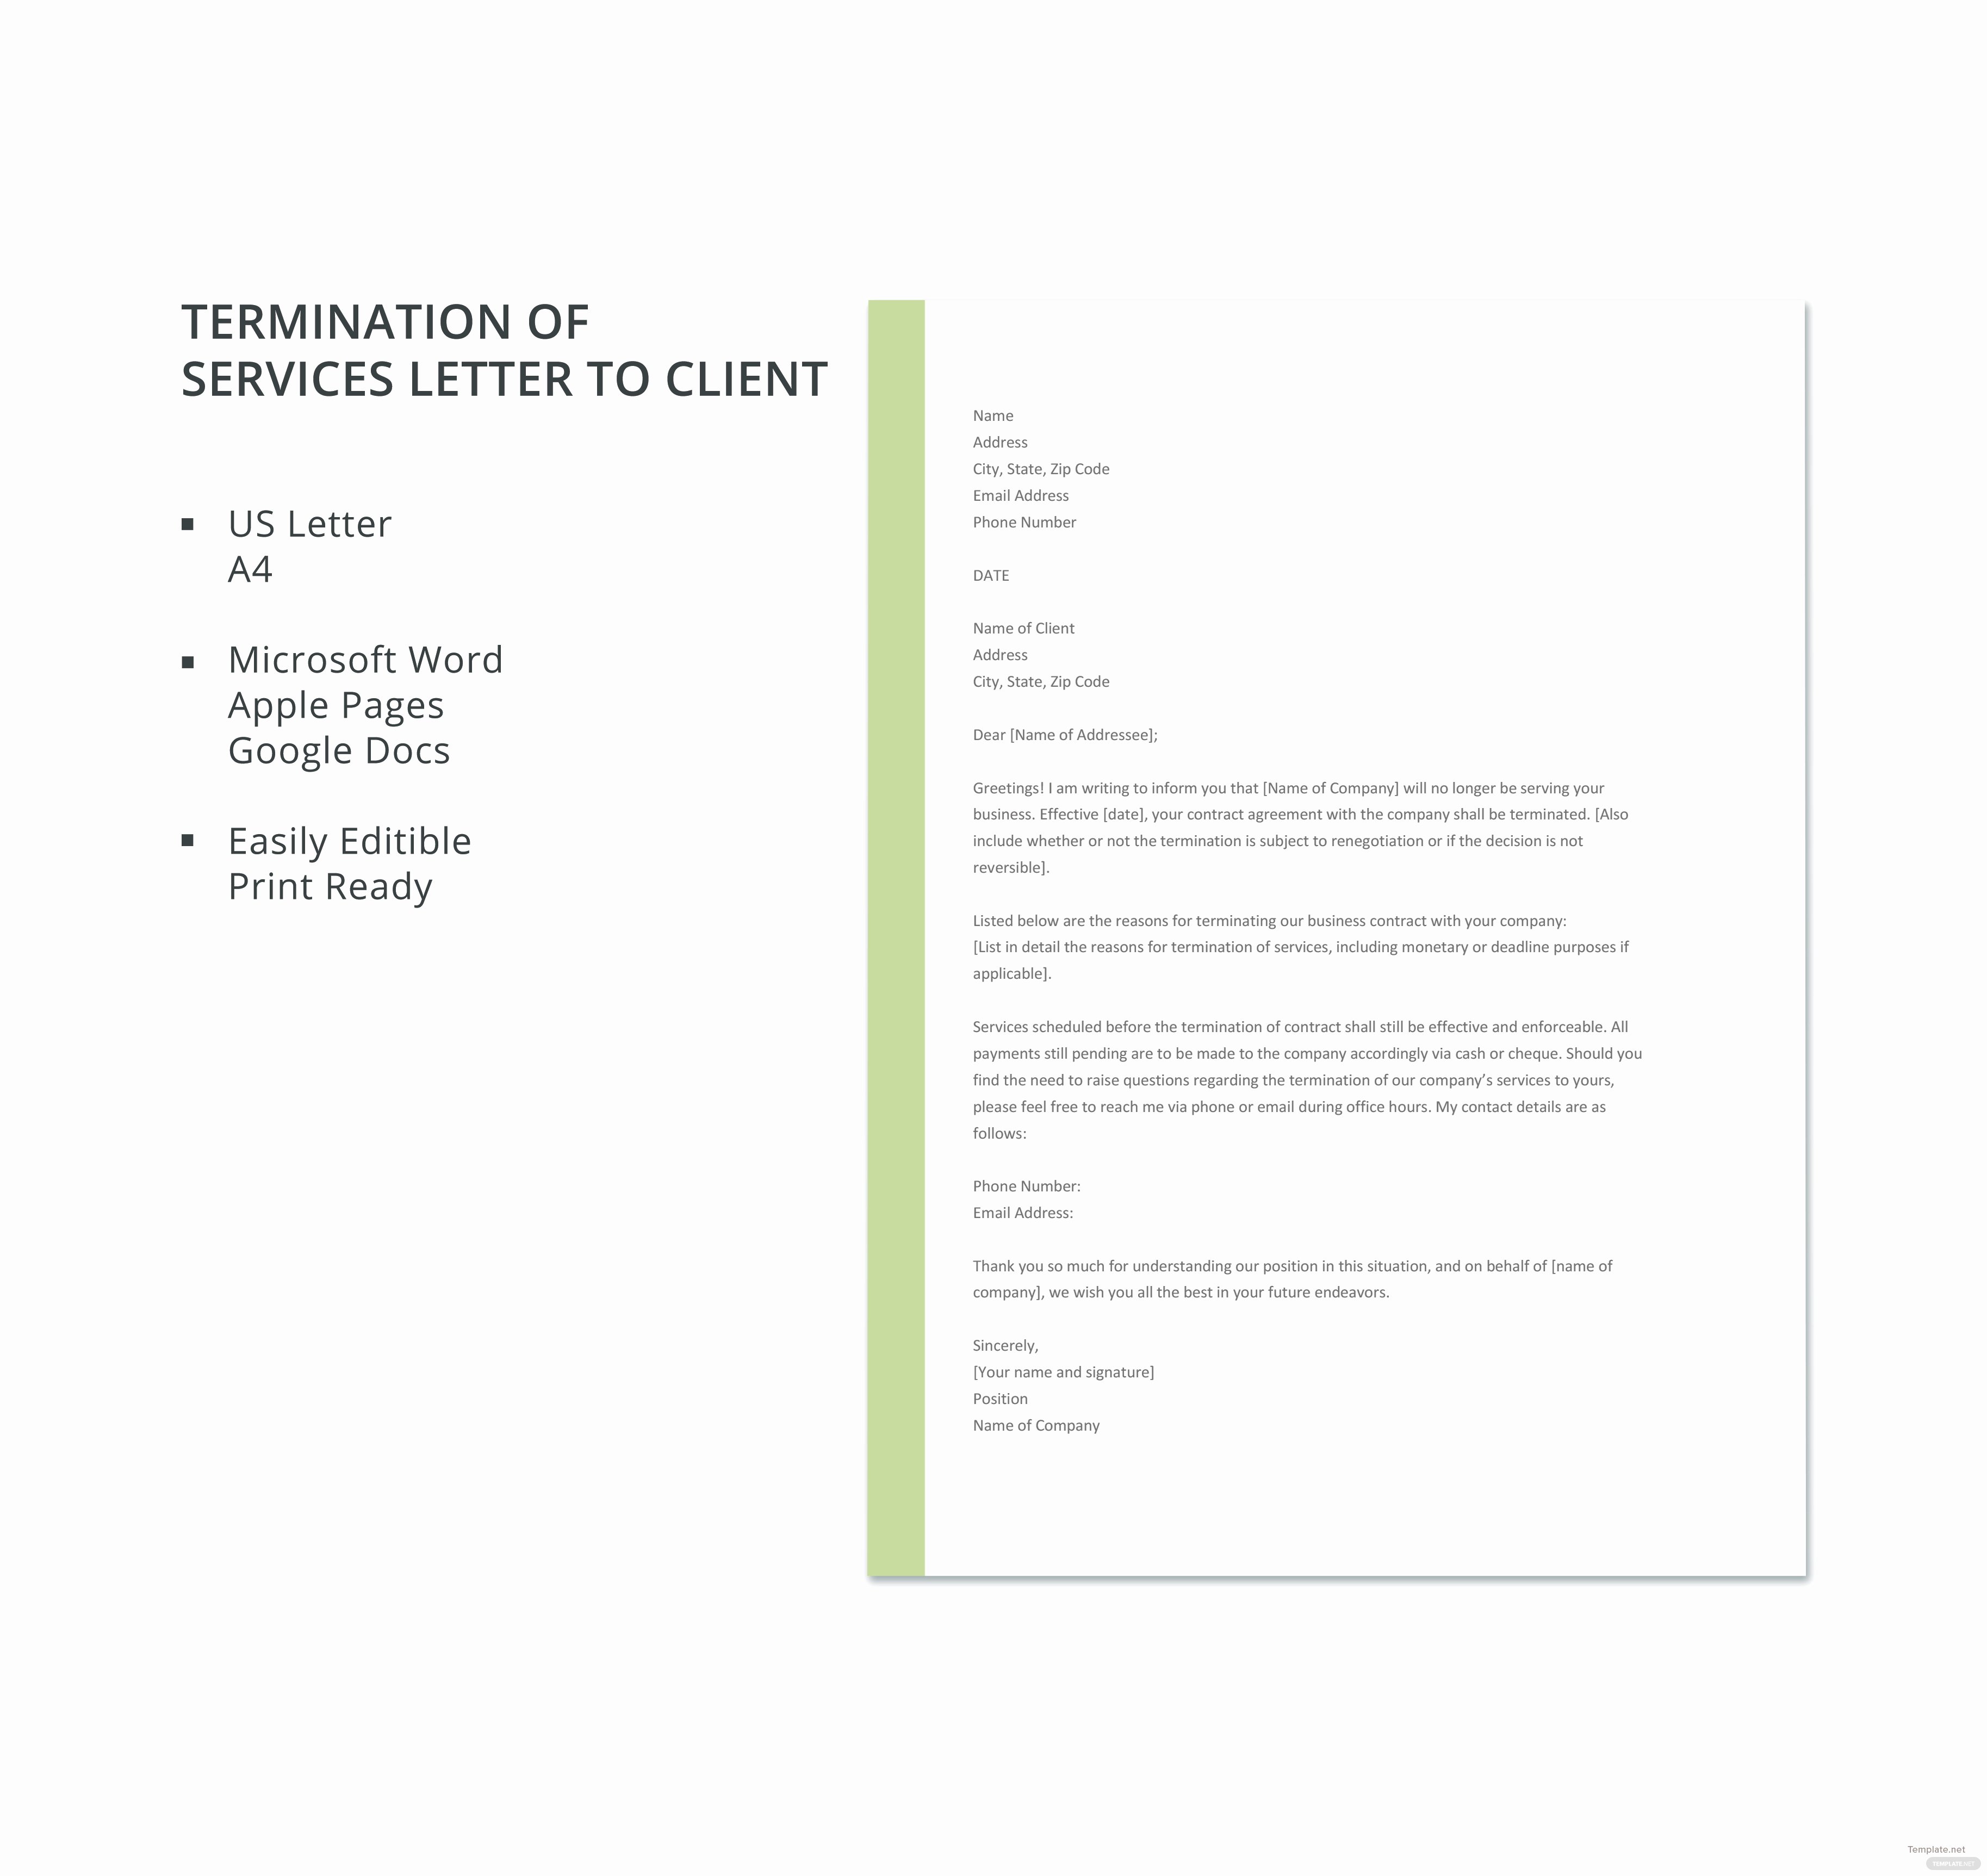 Client Termination Letter Template Lovely Free Termination Of Services Letter Template to Client In